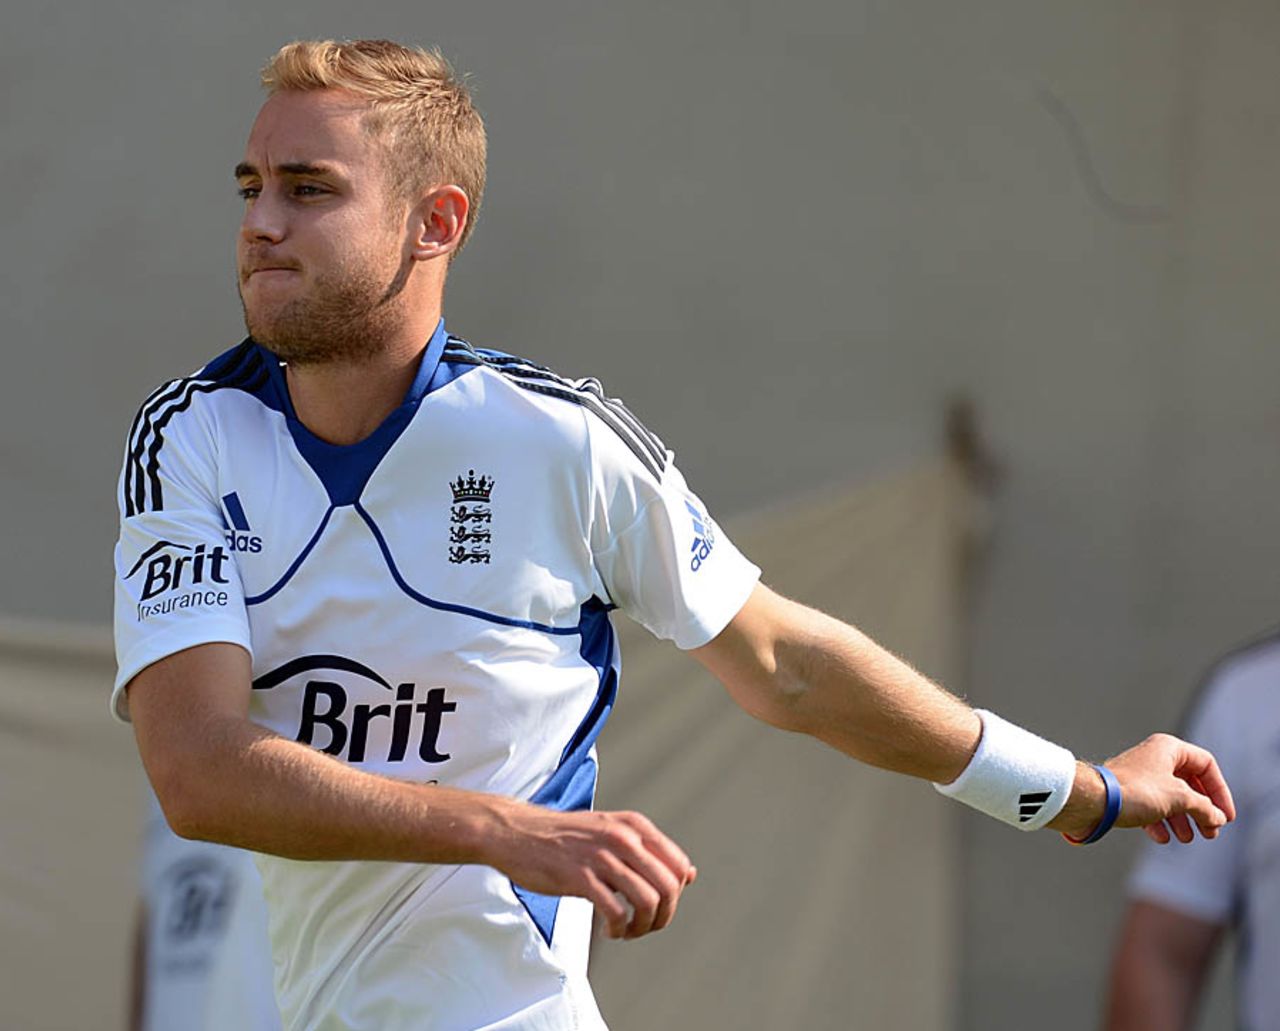 Stuart Broad warms up in a training session, Ahmedabad, November 13, 2012